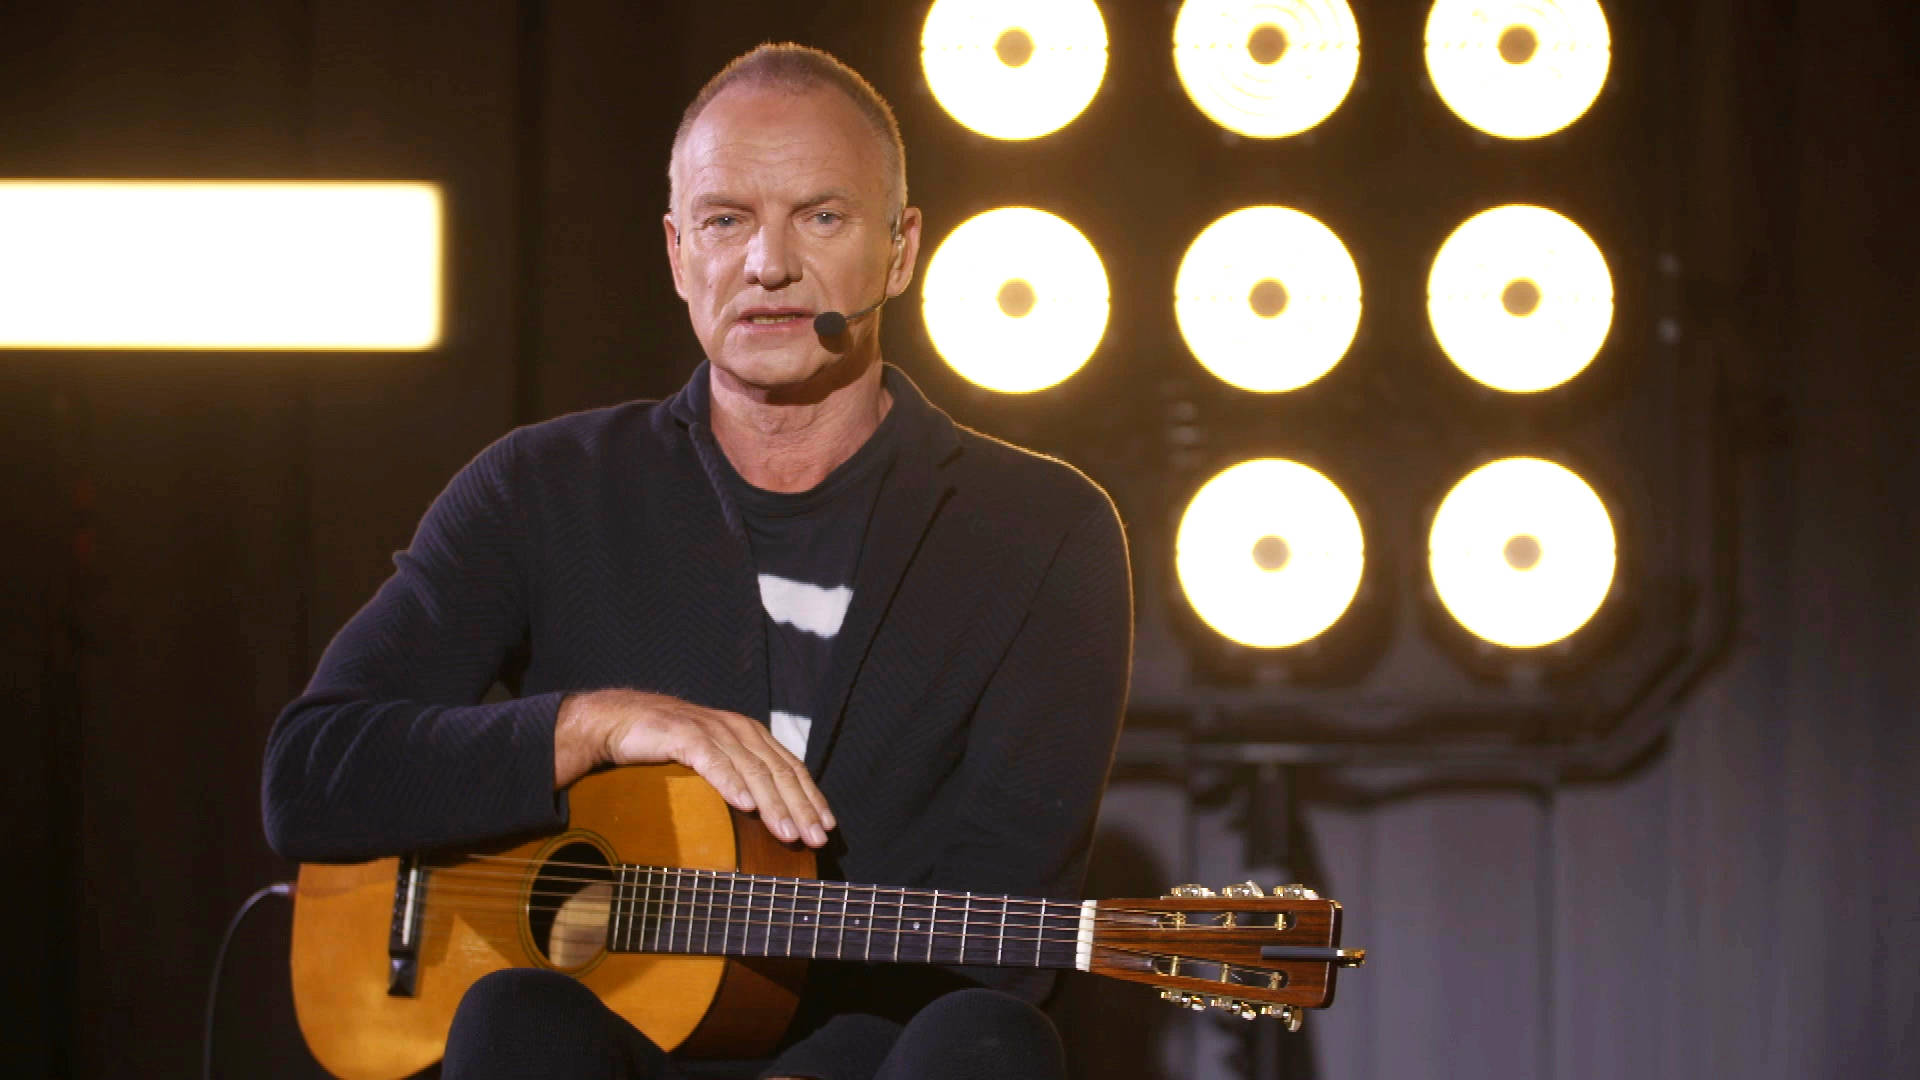 Stinghåller Gitarr (for A Wallpaper Featuring An Image Of Sting Holding A Guitar) Wallpaper